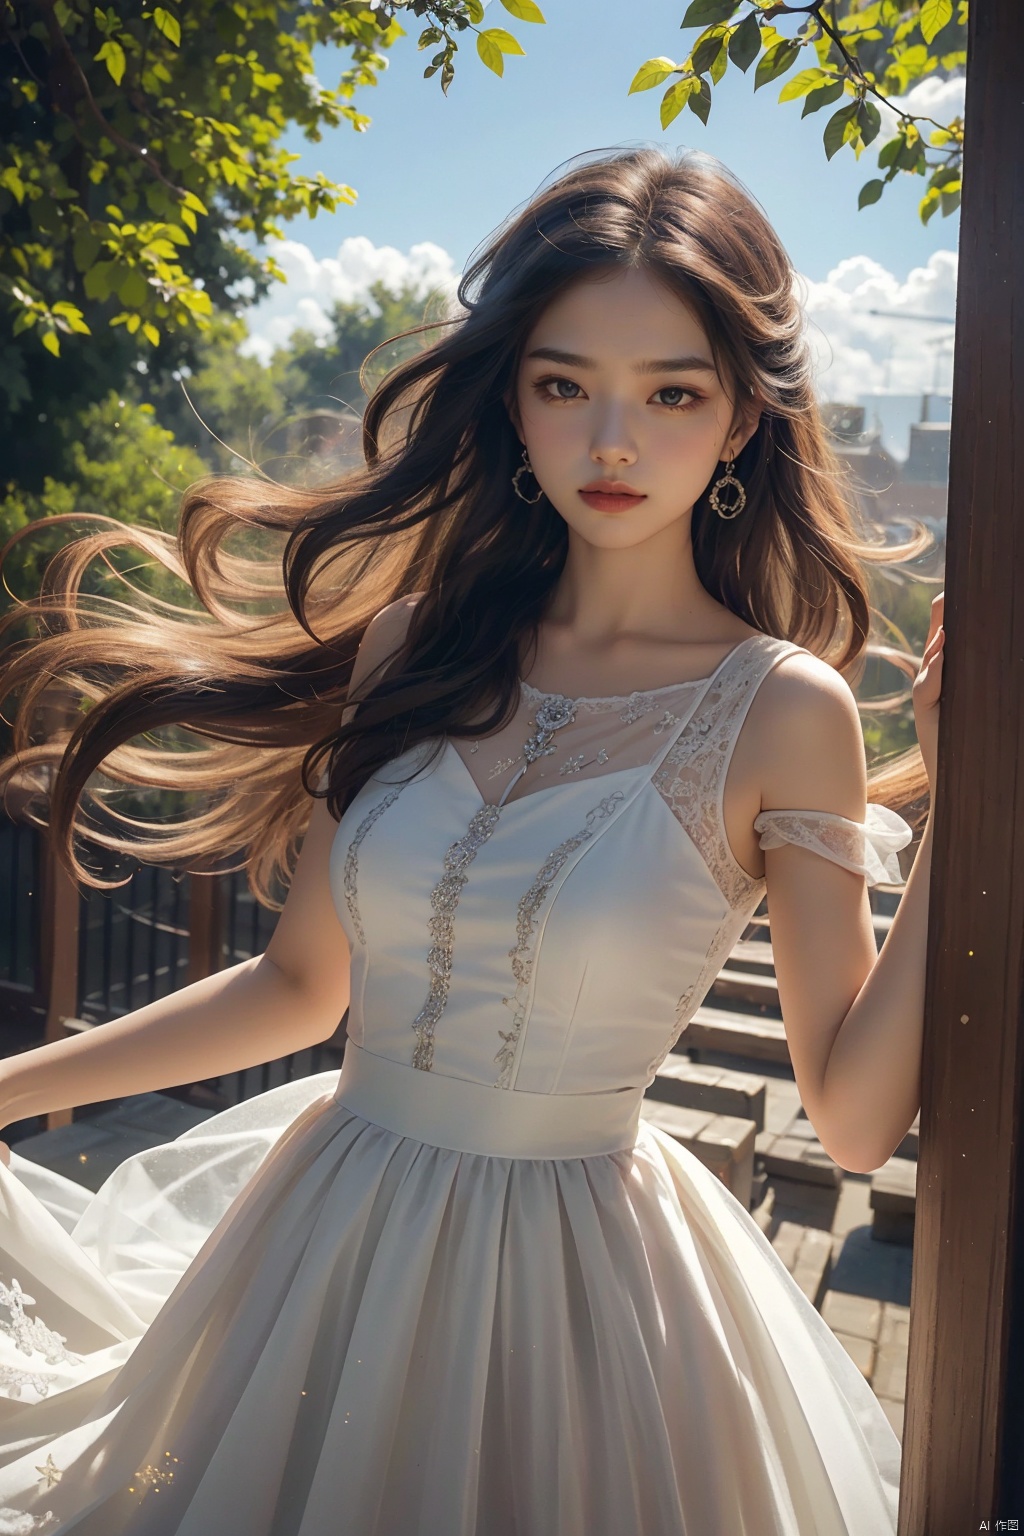 1 girl,extraordinary temperament,beautiful,delicate face,light makeup,eyes deep and full of stories,a soft long hair fluttering in the wind,wearing a simple but elegant long skirt,skirt with the movement of light swing,highlighting the unique temperament and beauty,background selection of deep color,creating a mysterious and dreamy atmosphere,with the girl's bright color contrast,highlight its main position in the picture,the picture design is meticulous,the use of light and shadow effects to enhance the girl's three-dimensional sense and texture,while creating a romantic and dreamy atmosphere,the girl's movement posture is carefully designed,elegant and natural,and integrated with the background. Form a harmonious and beautiful picture,the specific background element design includes flowing clouds,flashing stars or dreamy flowers,echoing with the image of the girl,it forms a painting full of fantasy and beauty. The color matching is harmonious and full of impact,which not only highlights the beauty and temperament of the girl,but also does not lose the overall coordination and beauty. The whole picture is full of imagination and creativity,which makes people intoxicated in the world of beauty and fantasy.,